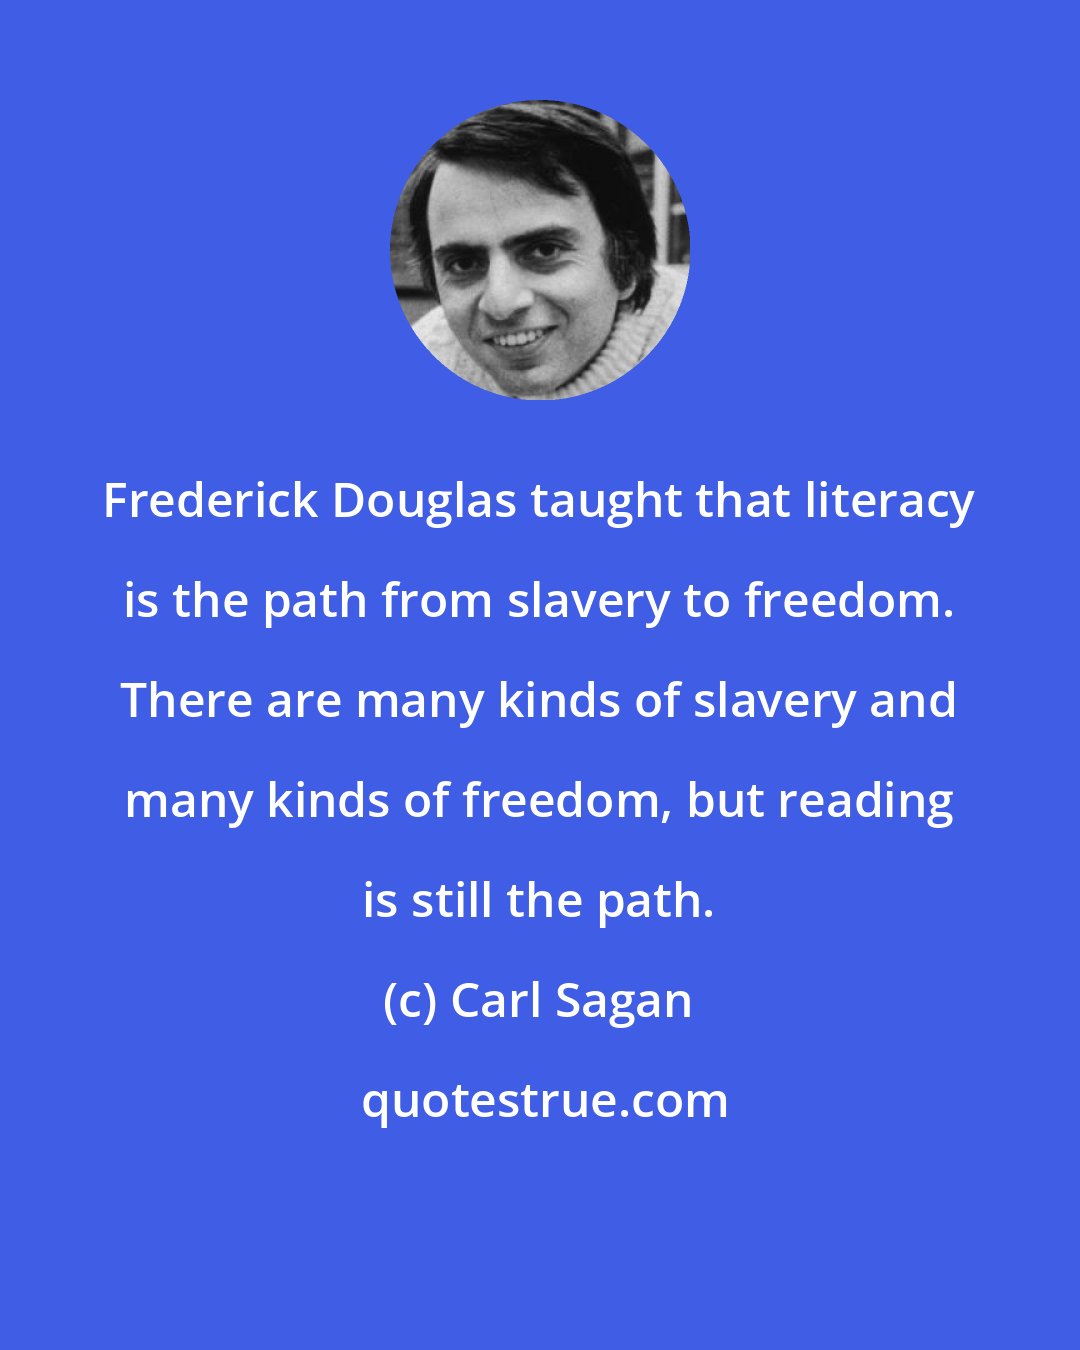 Carl Sagan: Frederick Douglas taught that literacy is the path from slavery to freedom. There are many kinds of slavery and many kinds of freedom, but reading is still the path.